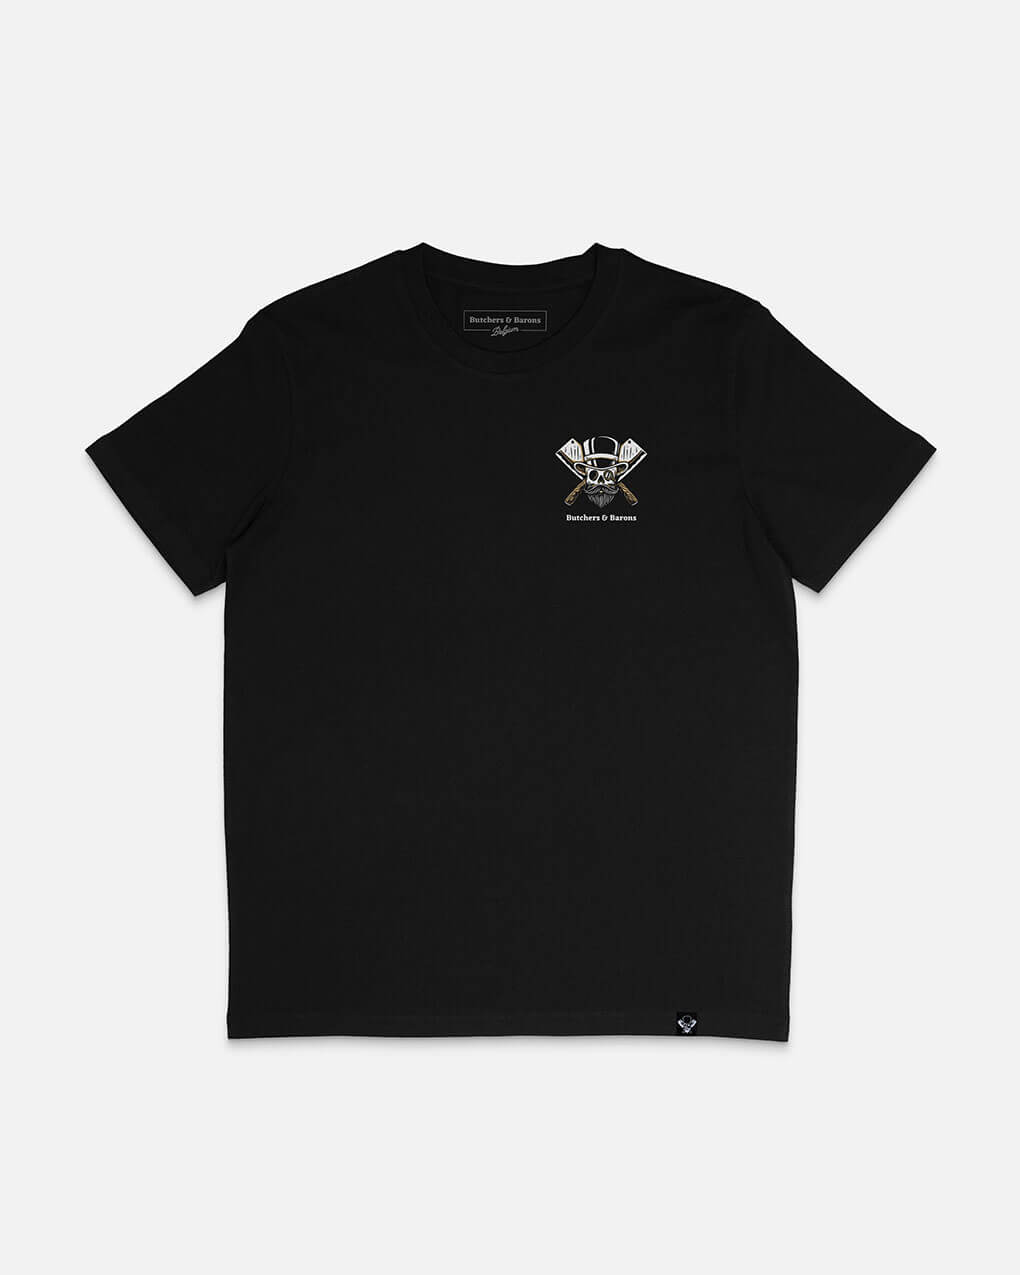 Loyalty black t-shirt by Butchers & Barons with skull, beard and monocle.